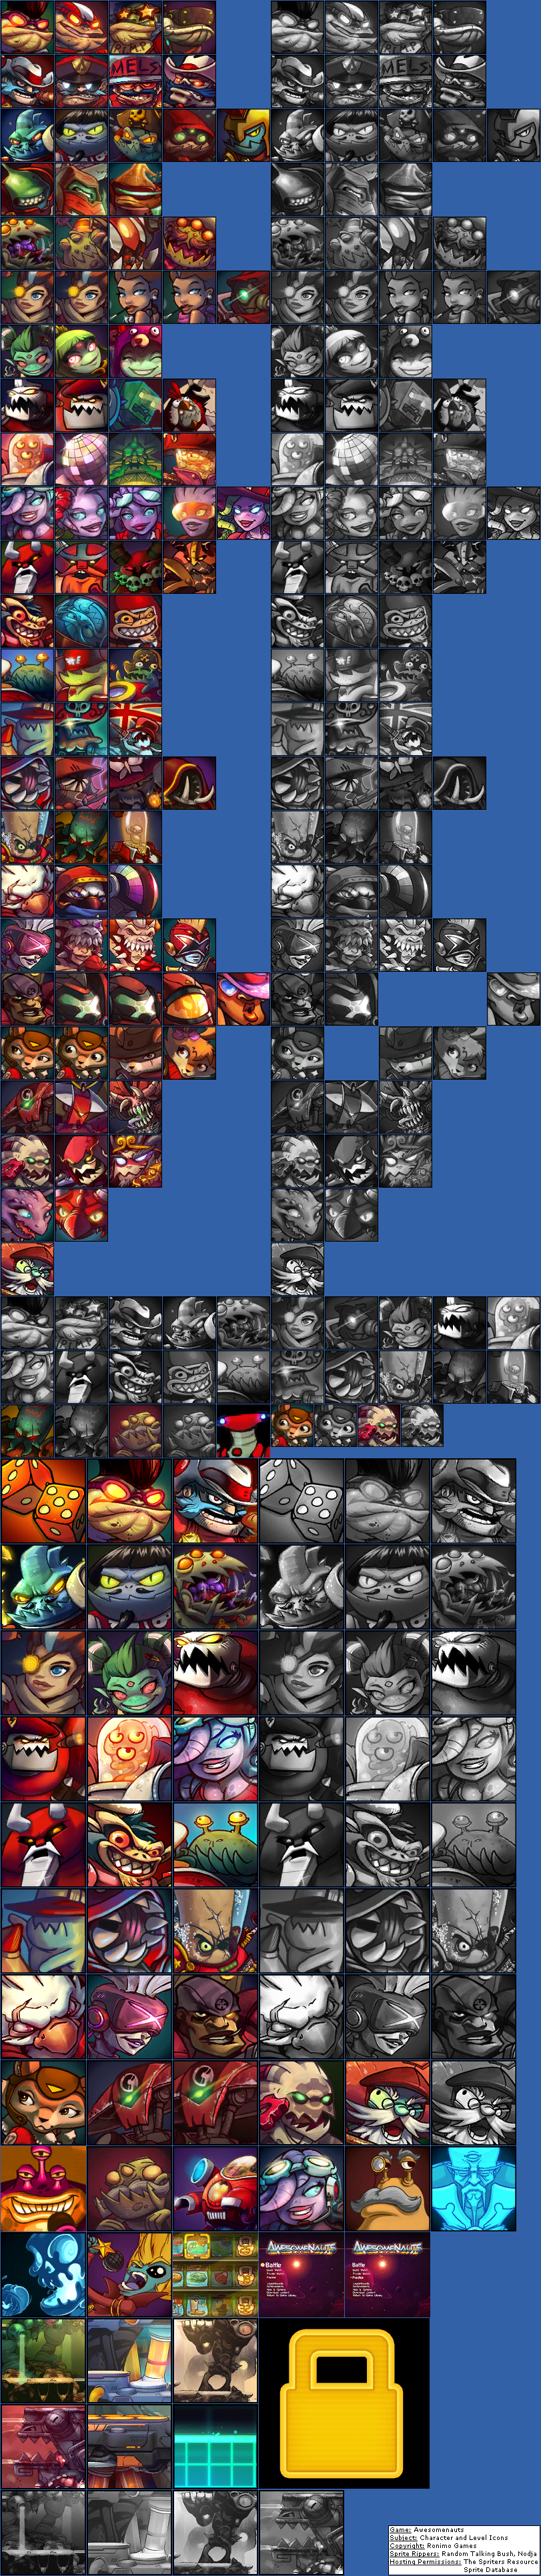 Awesomenauts - Character and Level Icons (Old)